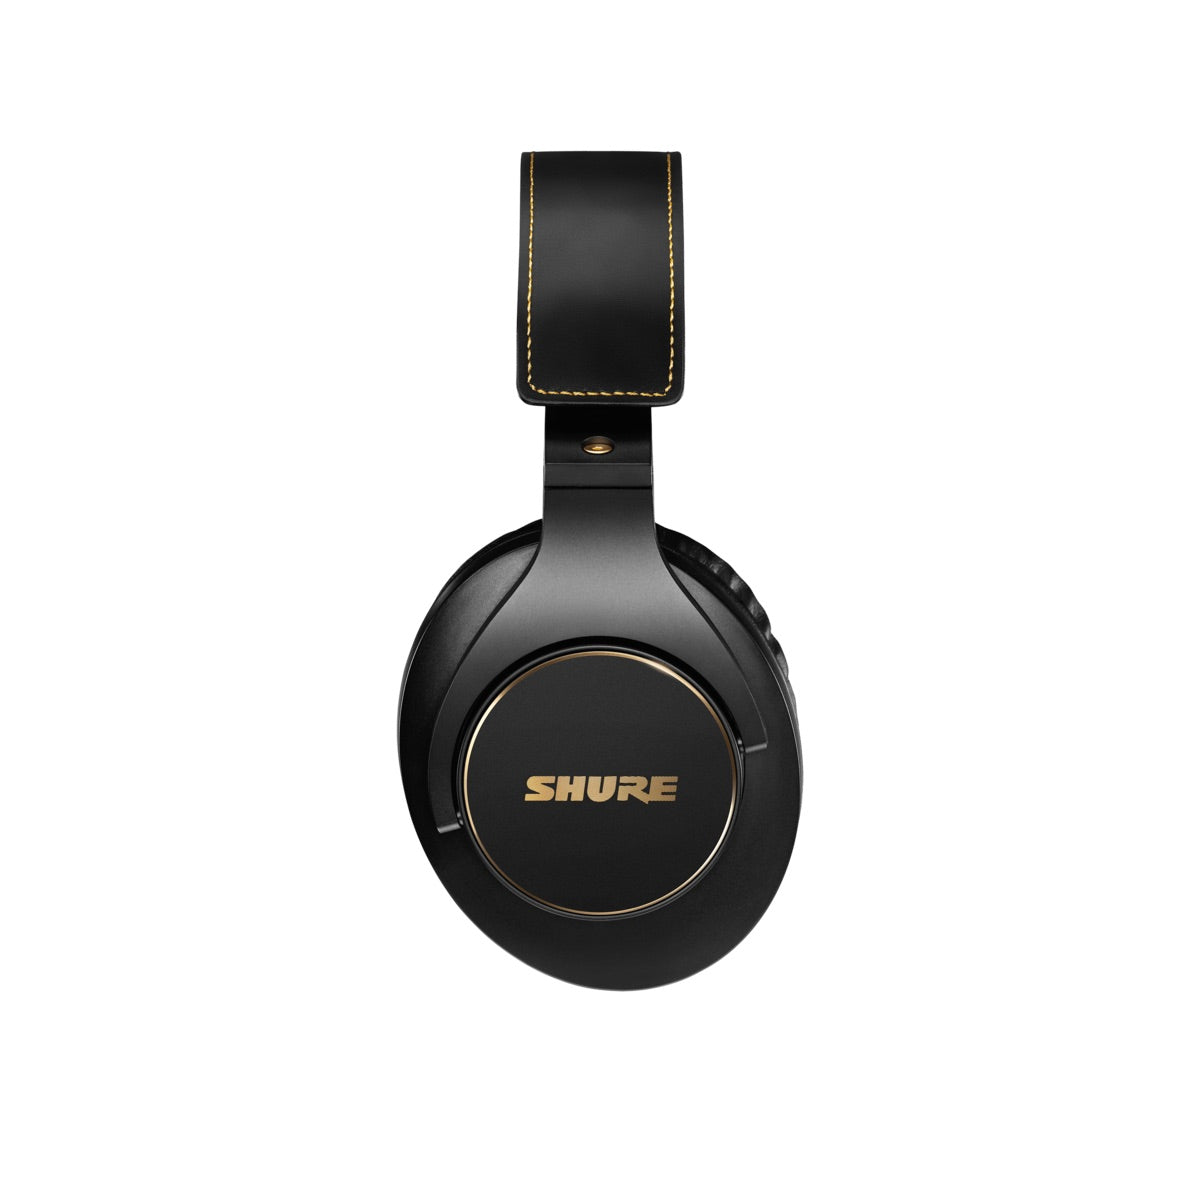 Shure SRH840A - Professional Monitoring Headphones, right side